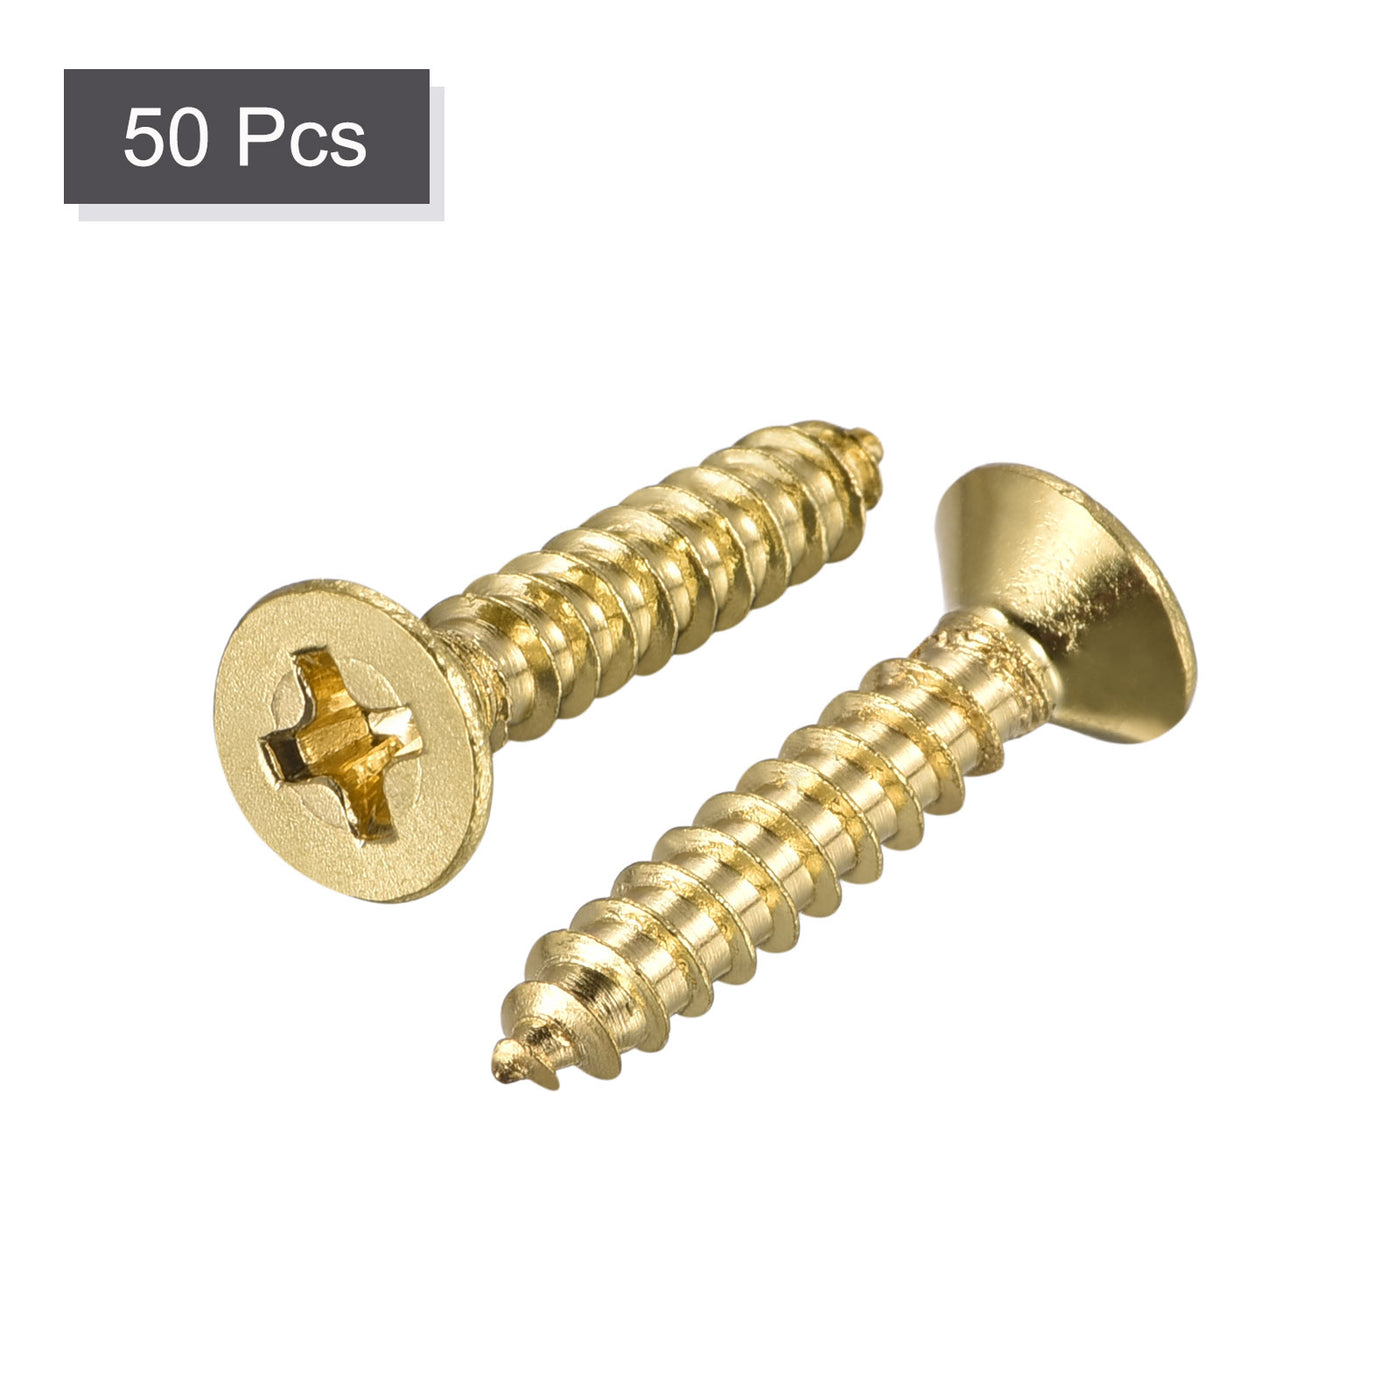 uxcell Uxcell Brass Wood Screws, M4x20mm Phillips Flat Head Self Tapping Connector for Door, Cabinet, Wooden Furniture 50Pcs